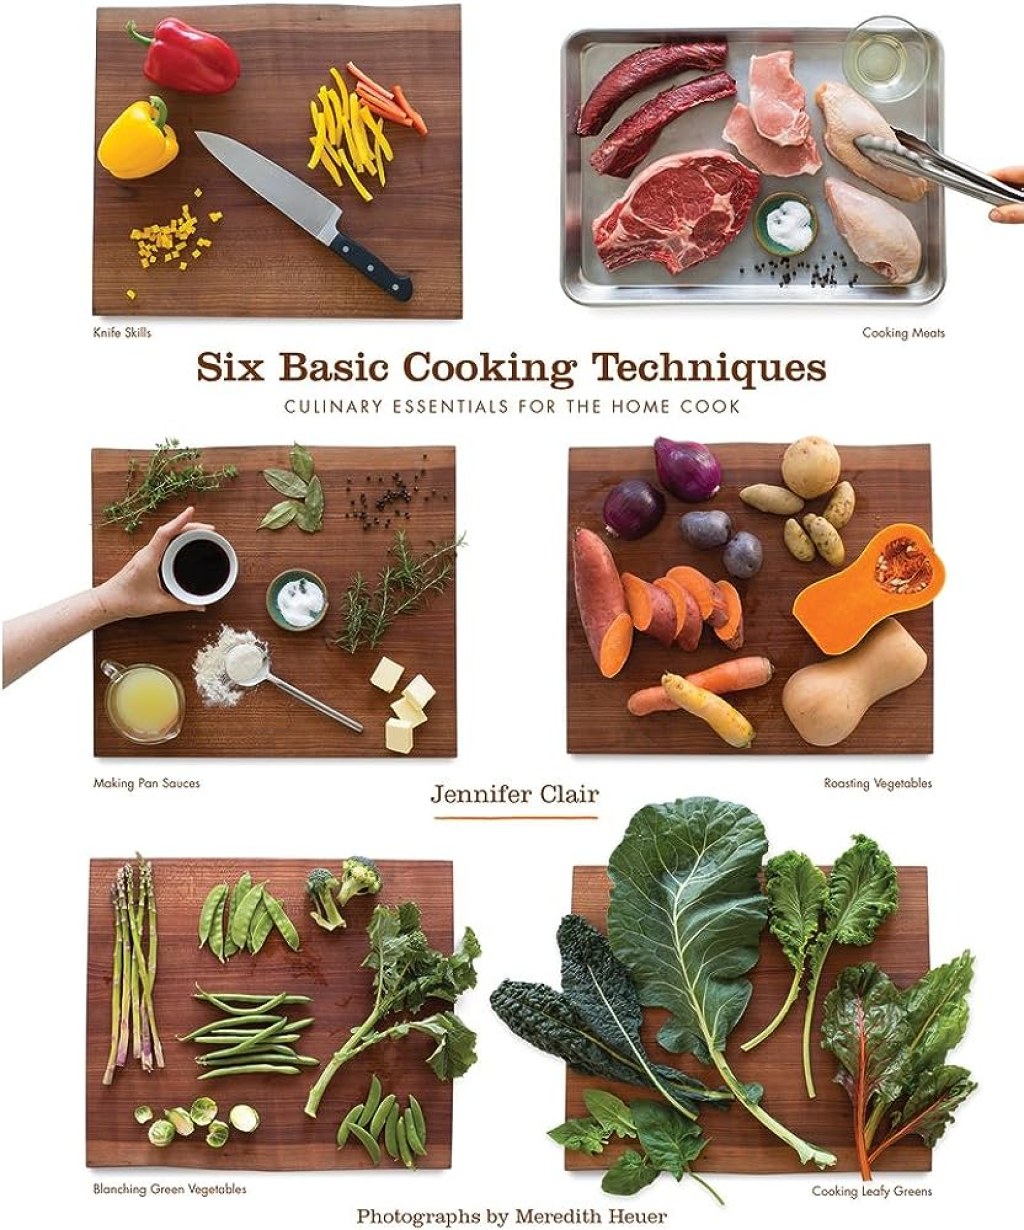 cooking techniques at home - Six Basic Cooking Techniques: Culinary Essentials for the Home Cook